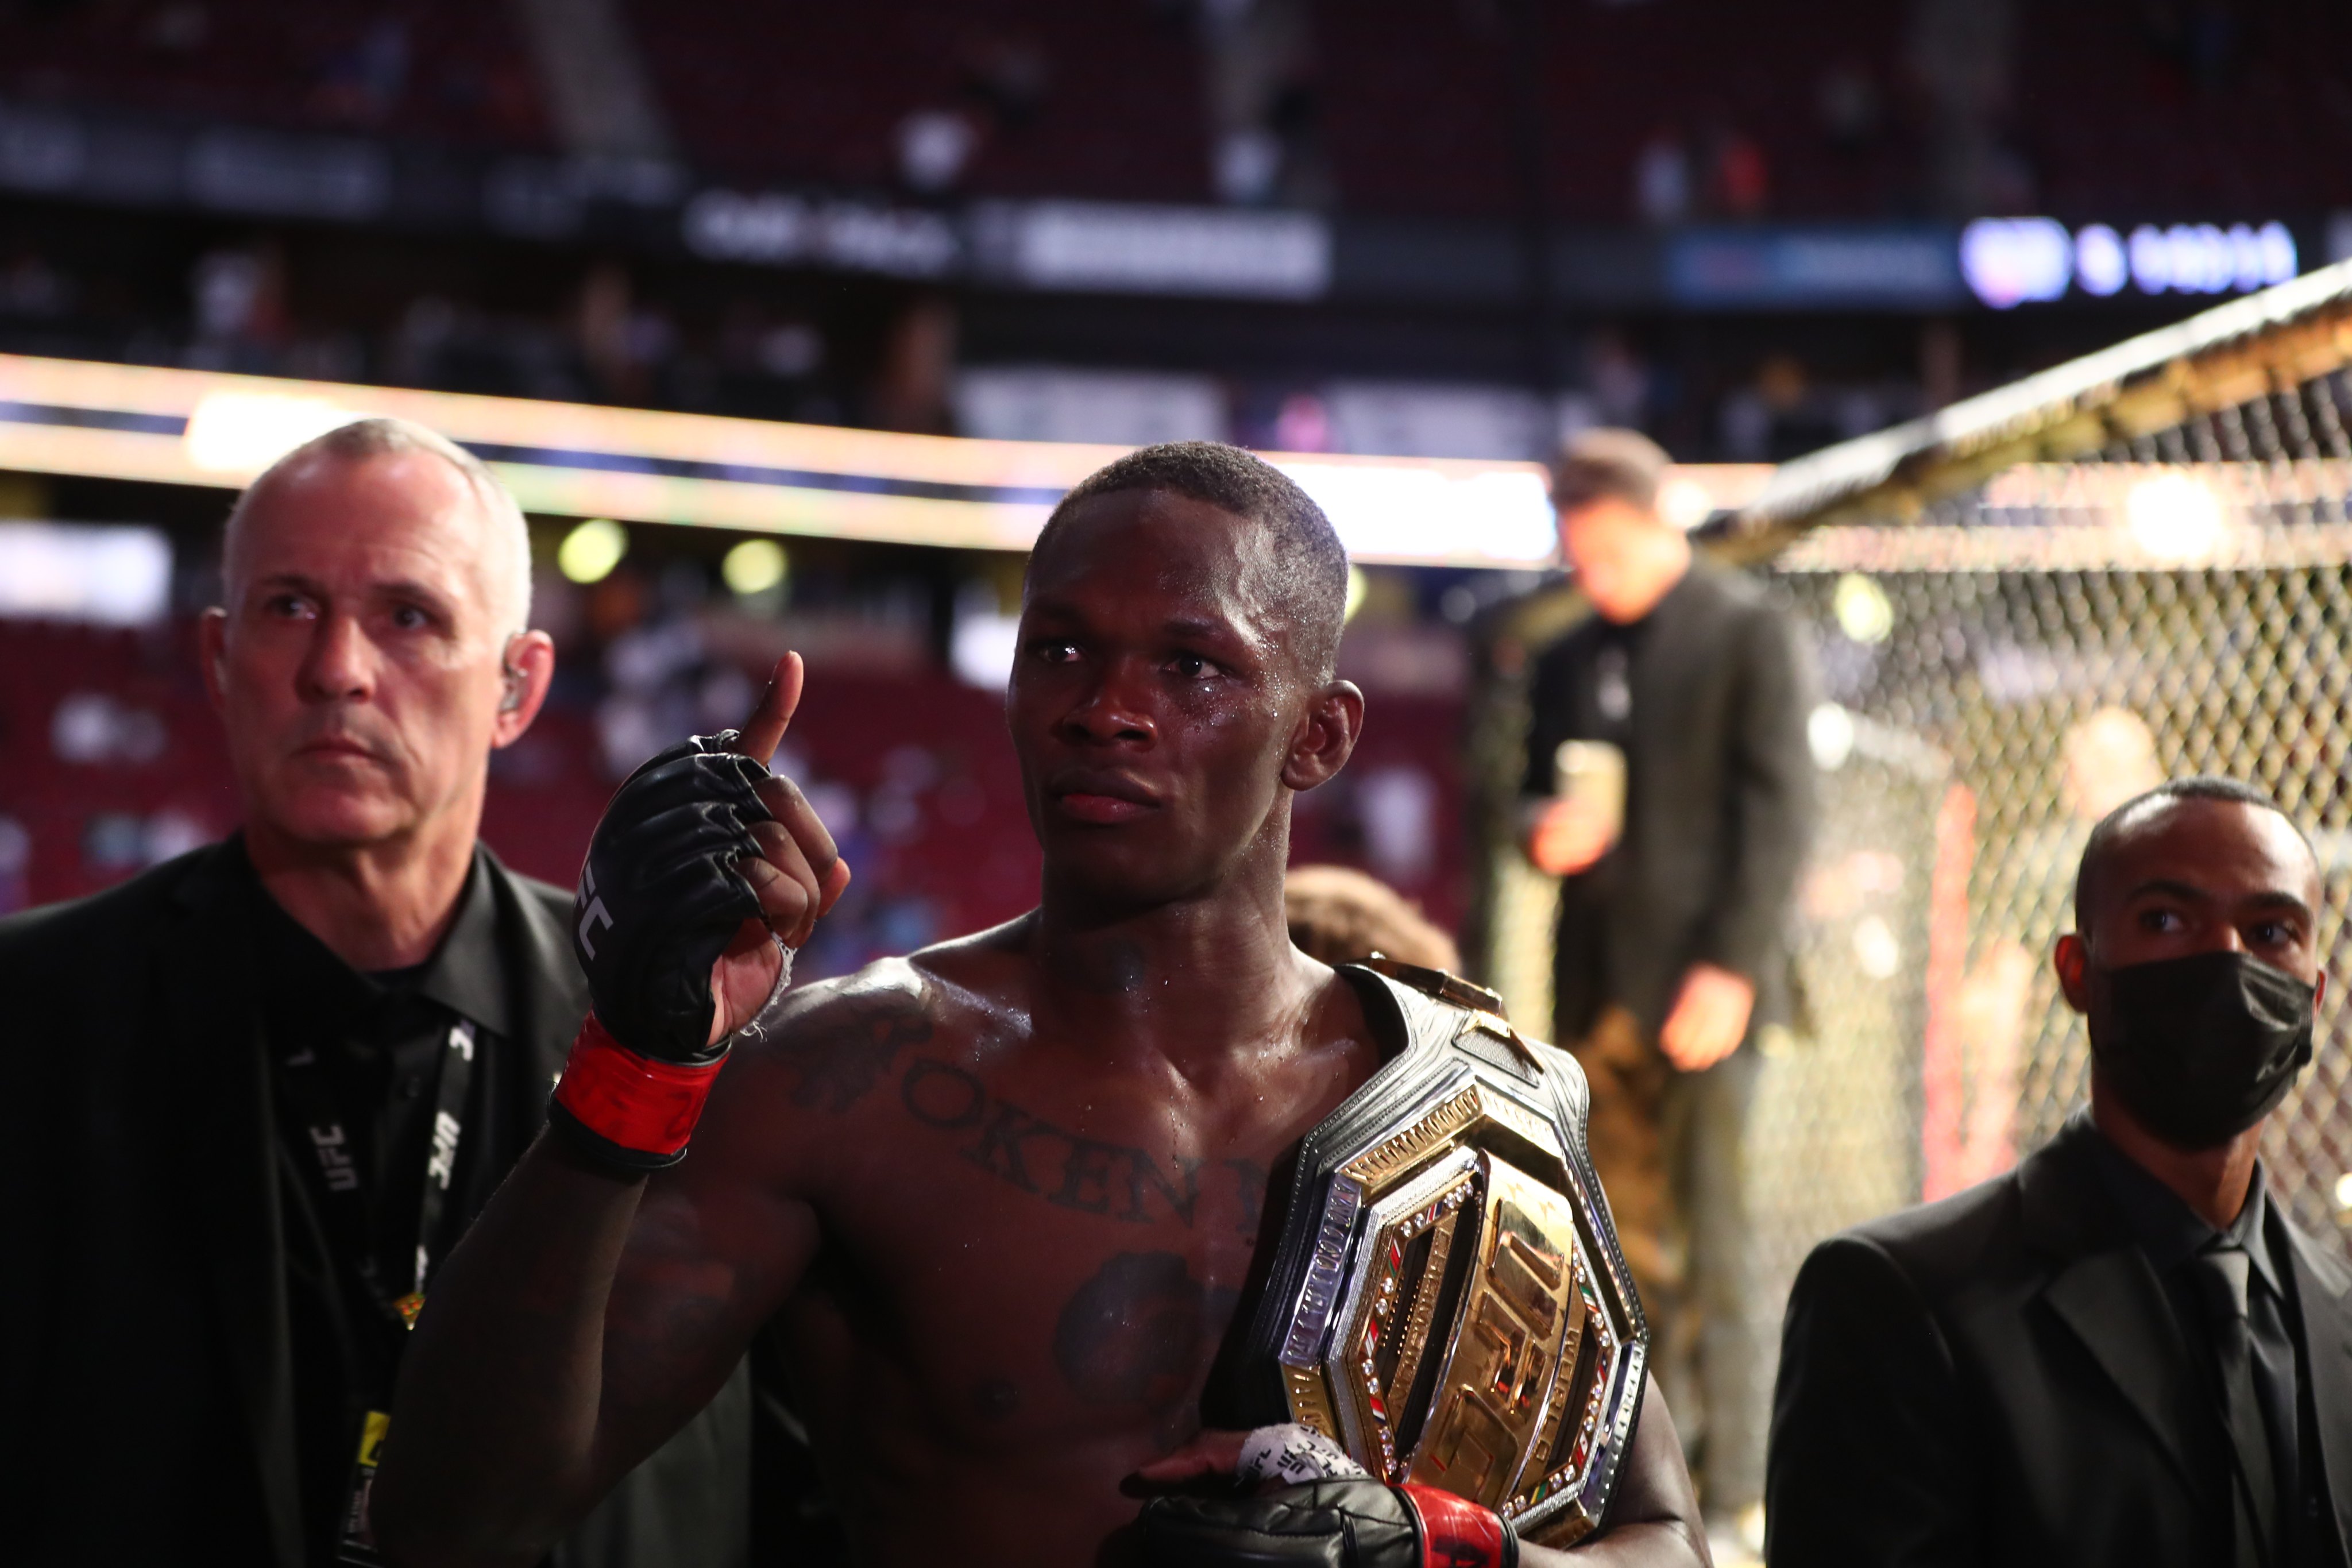 Israel Adesanya leaves the Octagon following his victory against Marvin Vettori at UFC 263. Photo: USA TODAY Sports